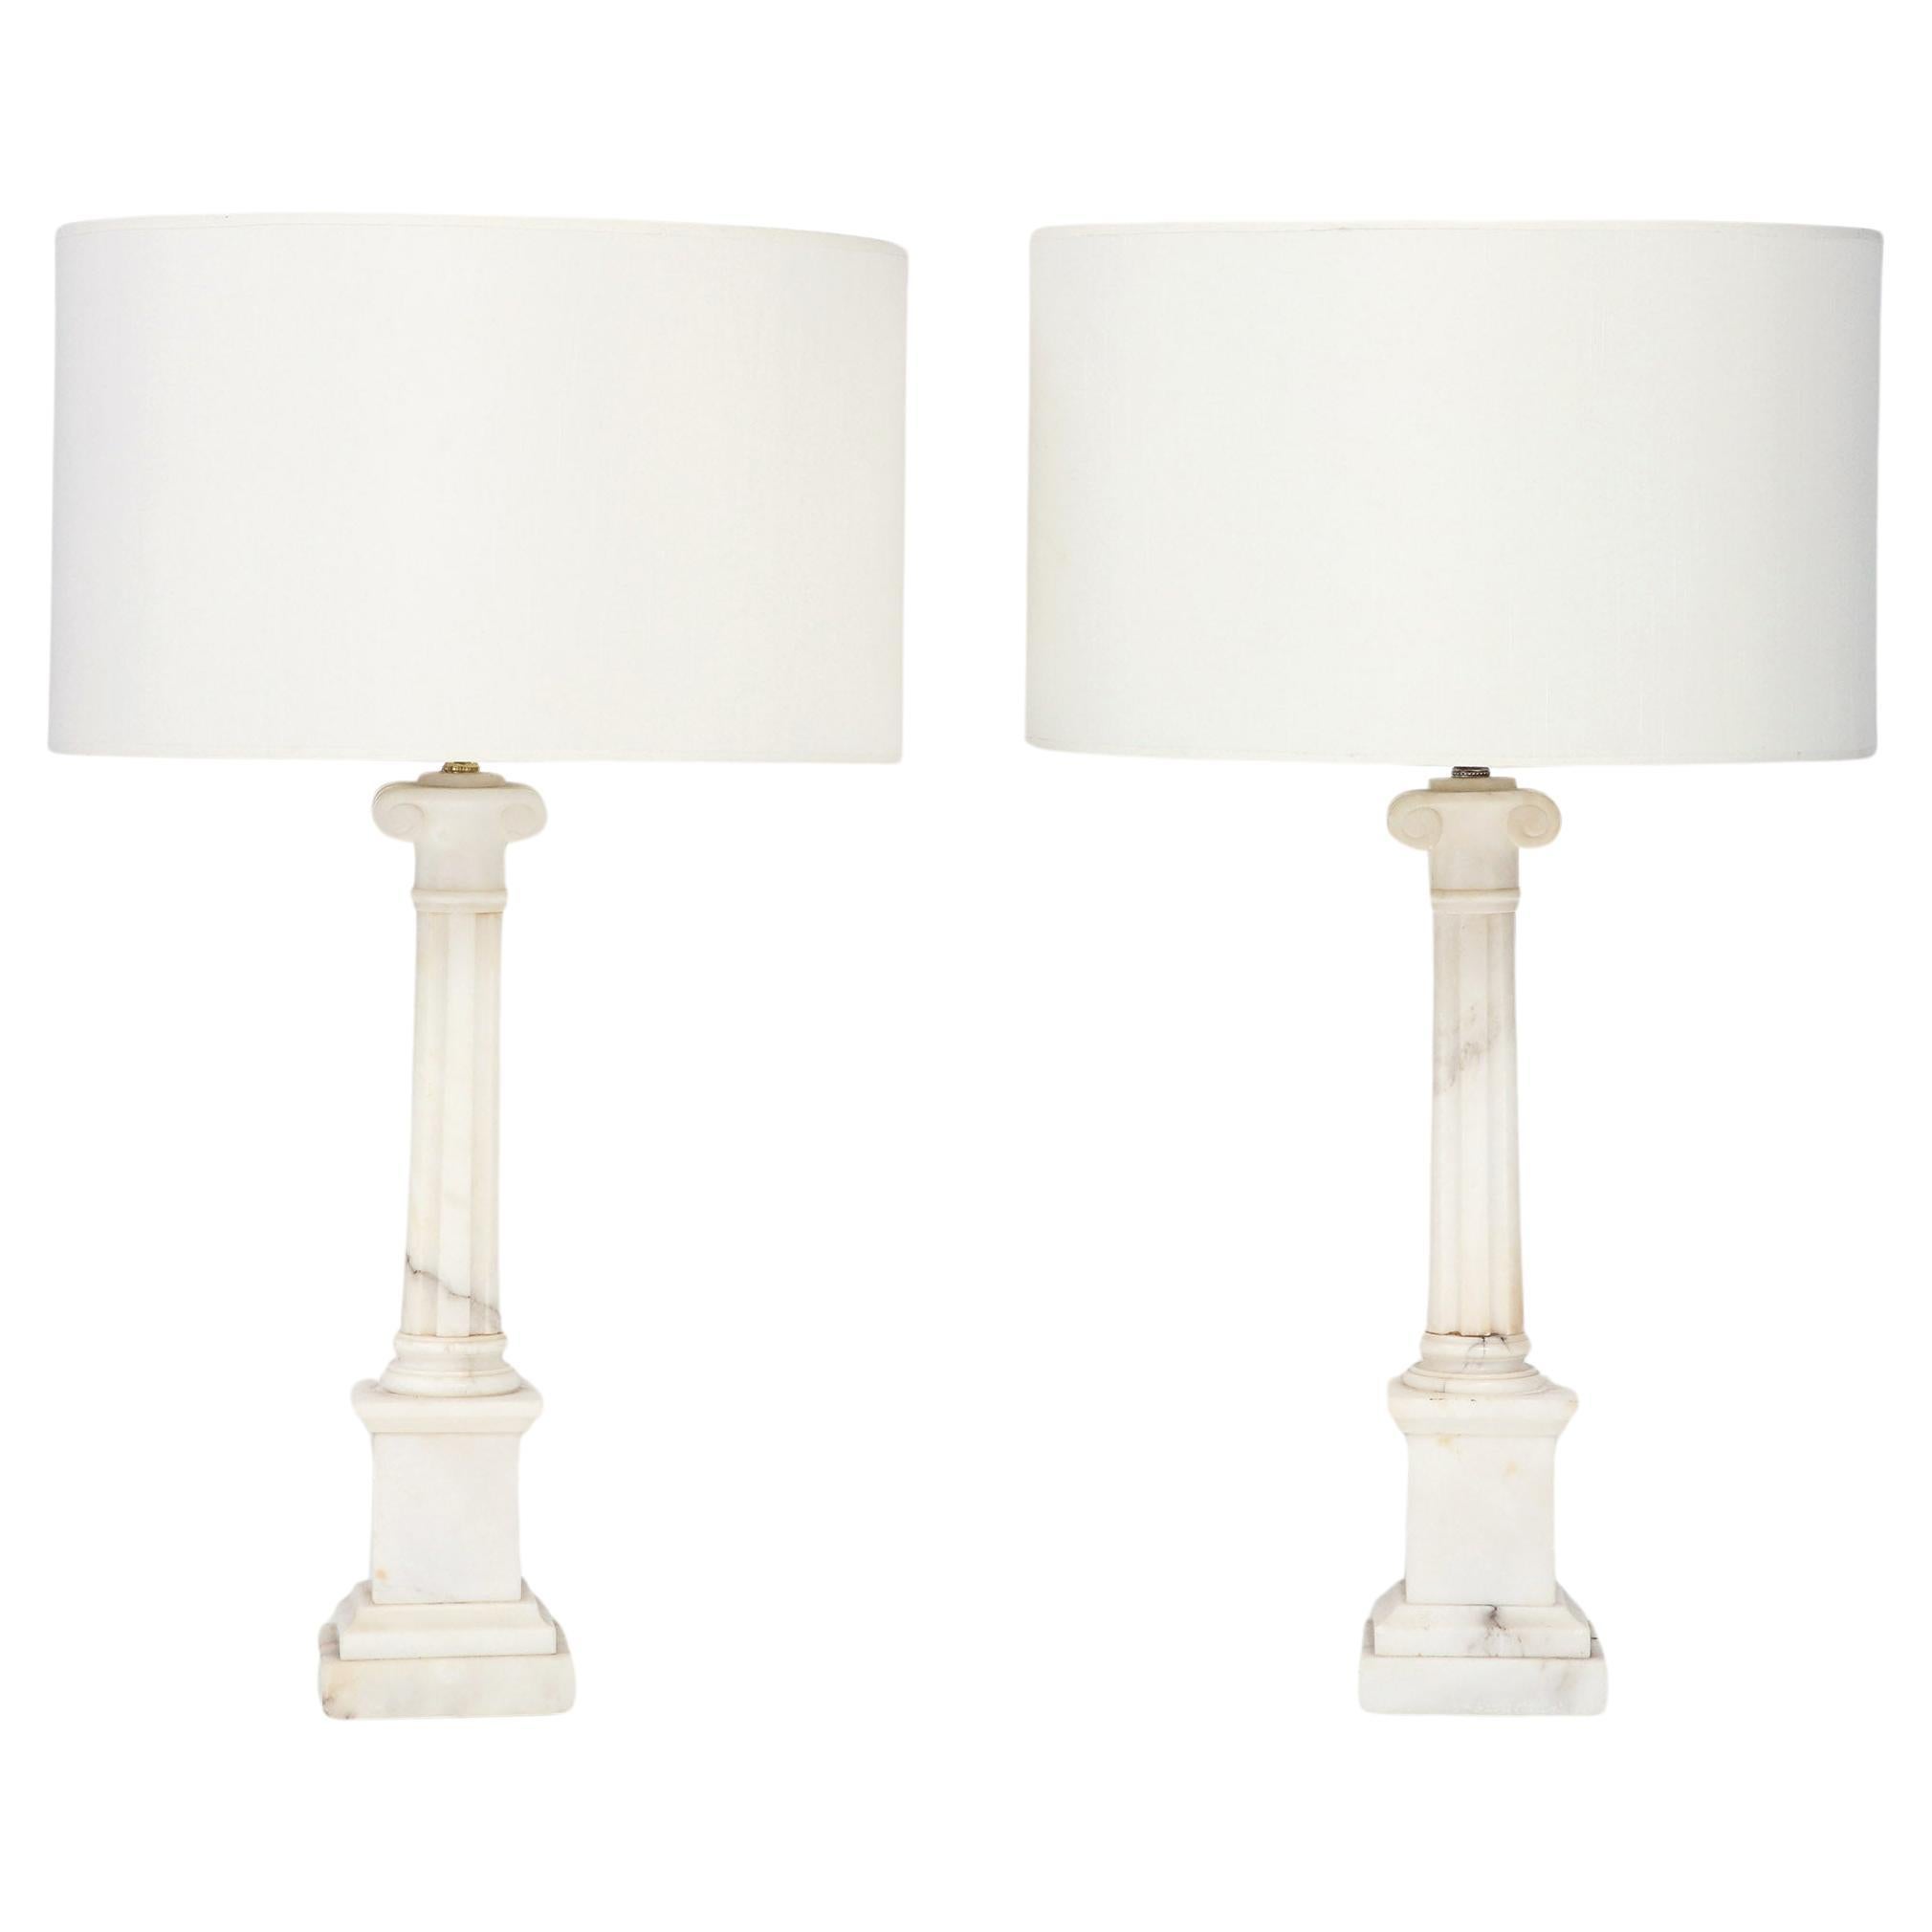 Pair of Italian Neo-classic Marble Column Lamps For Sale